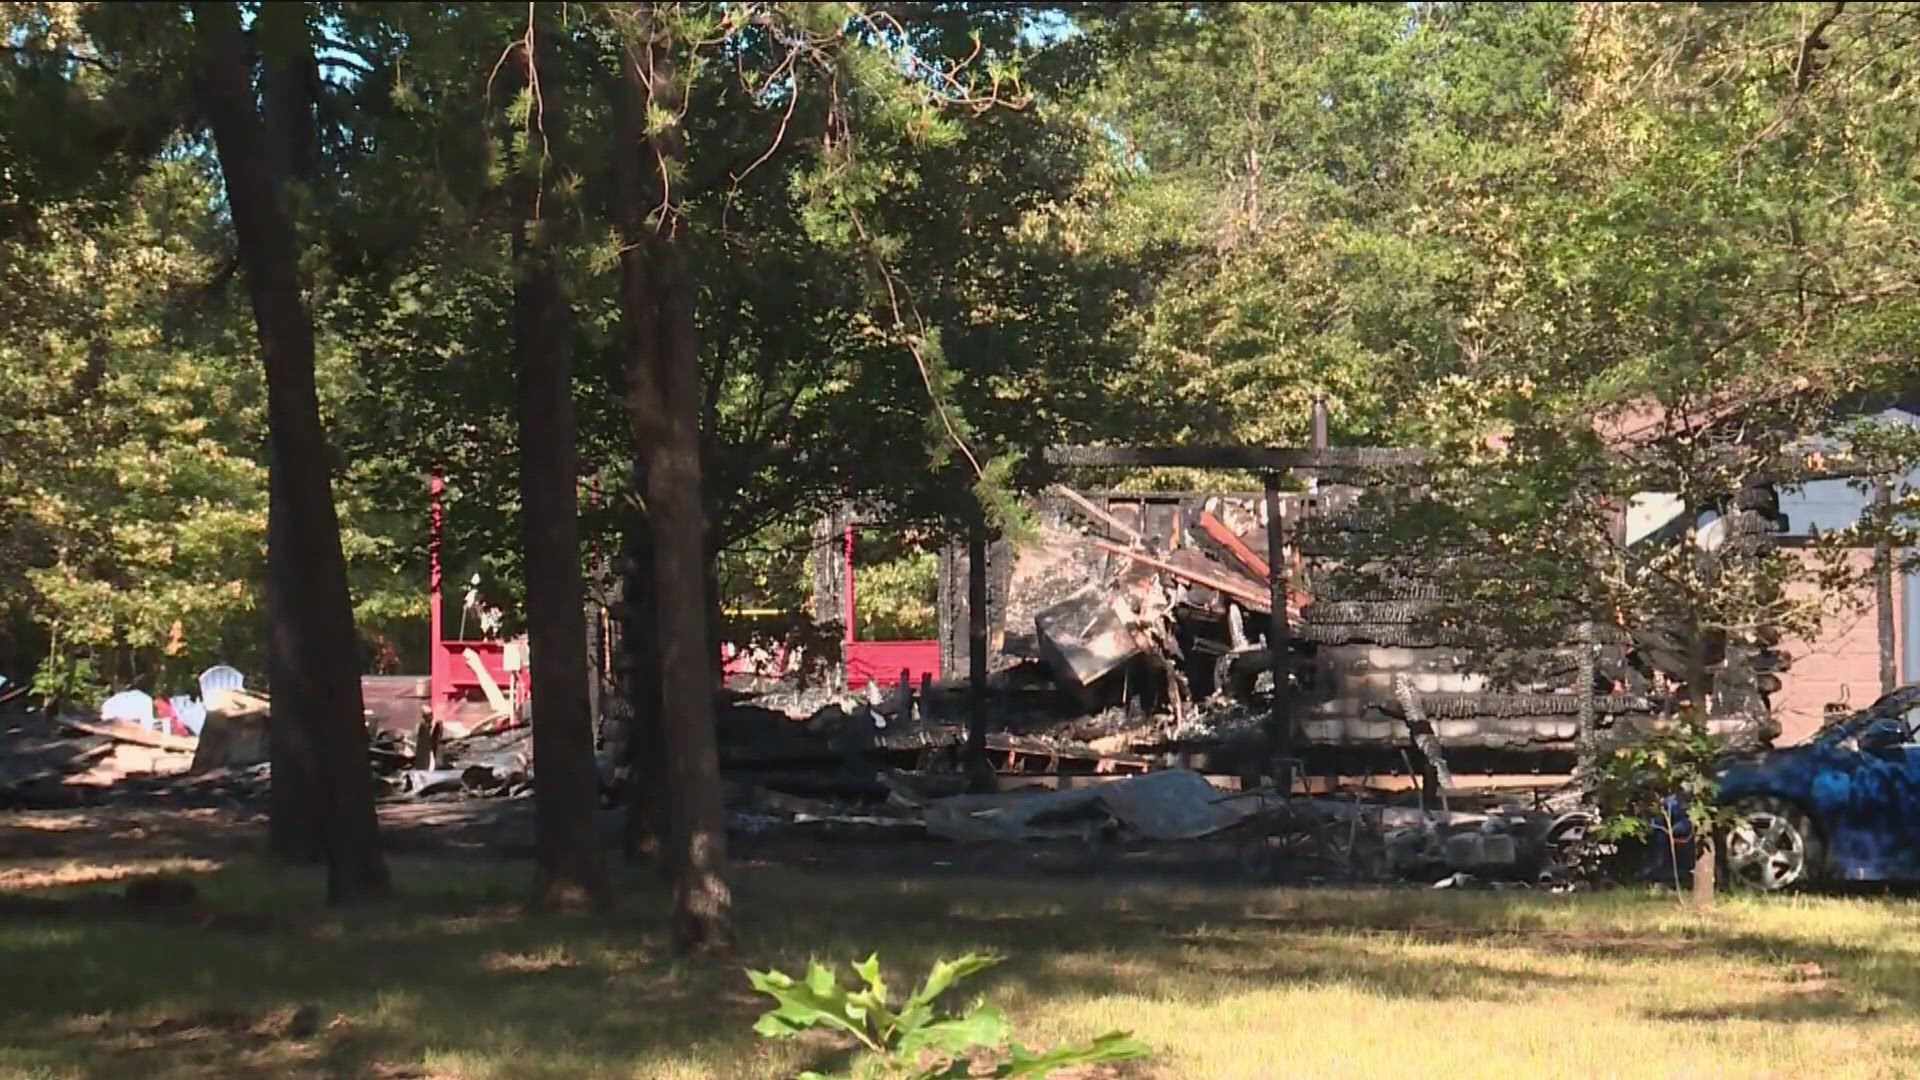 The sheriff's office said the fire appears to be accidental but an investigation is ongoing.